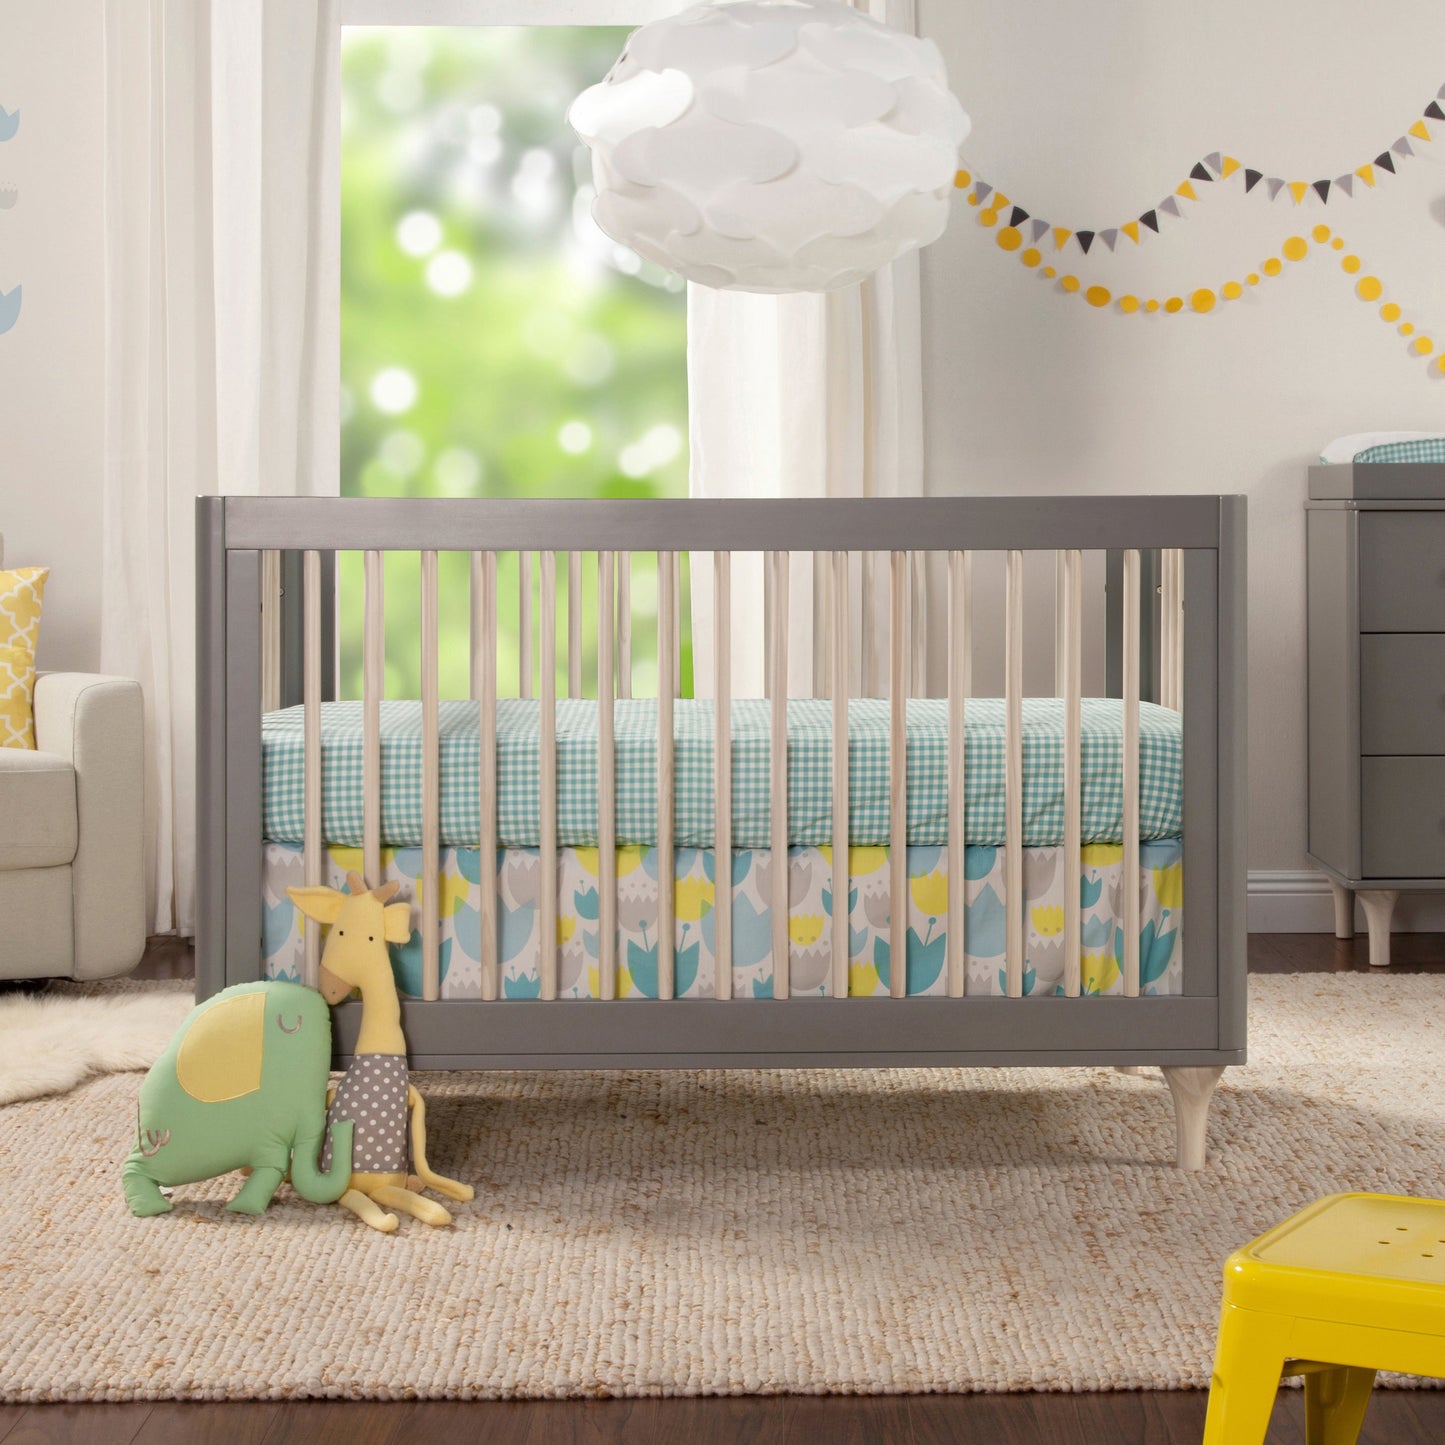 Lolly 3-in-1 Convertible Crib with Conversion Kit